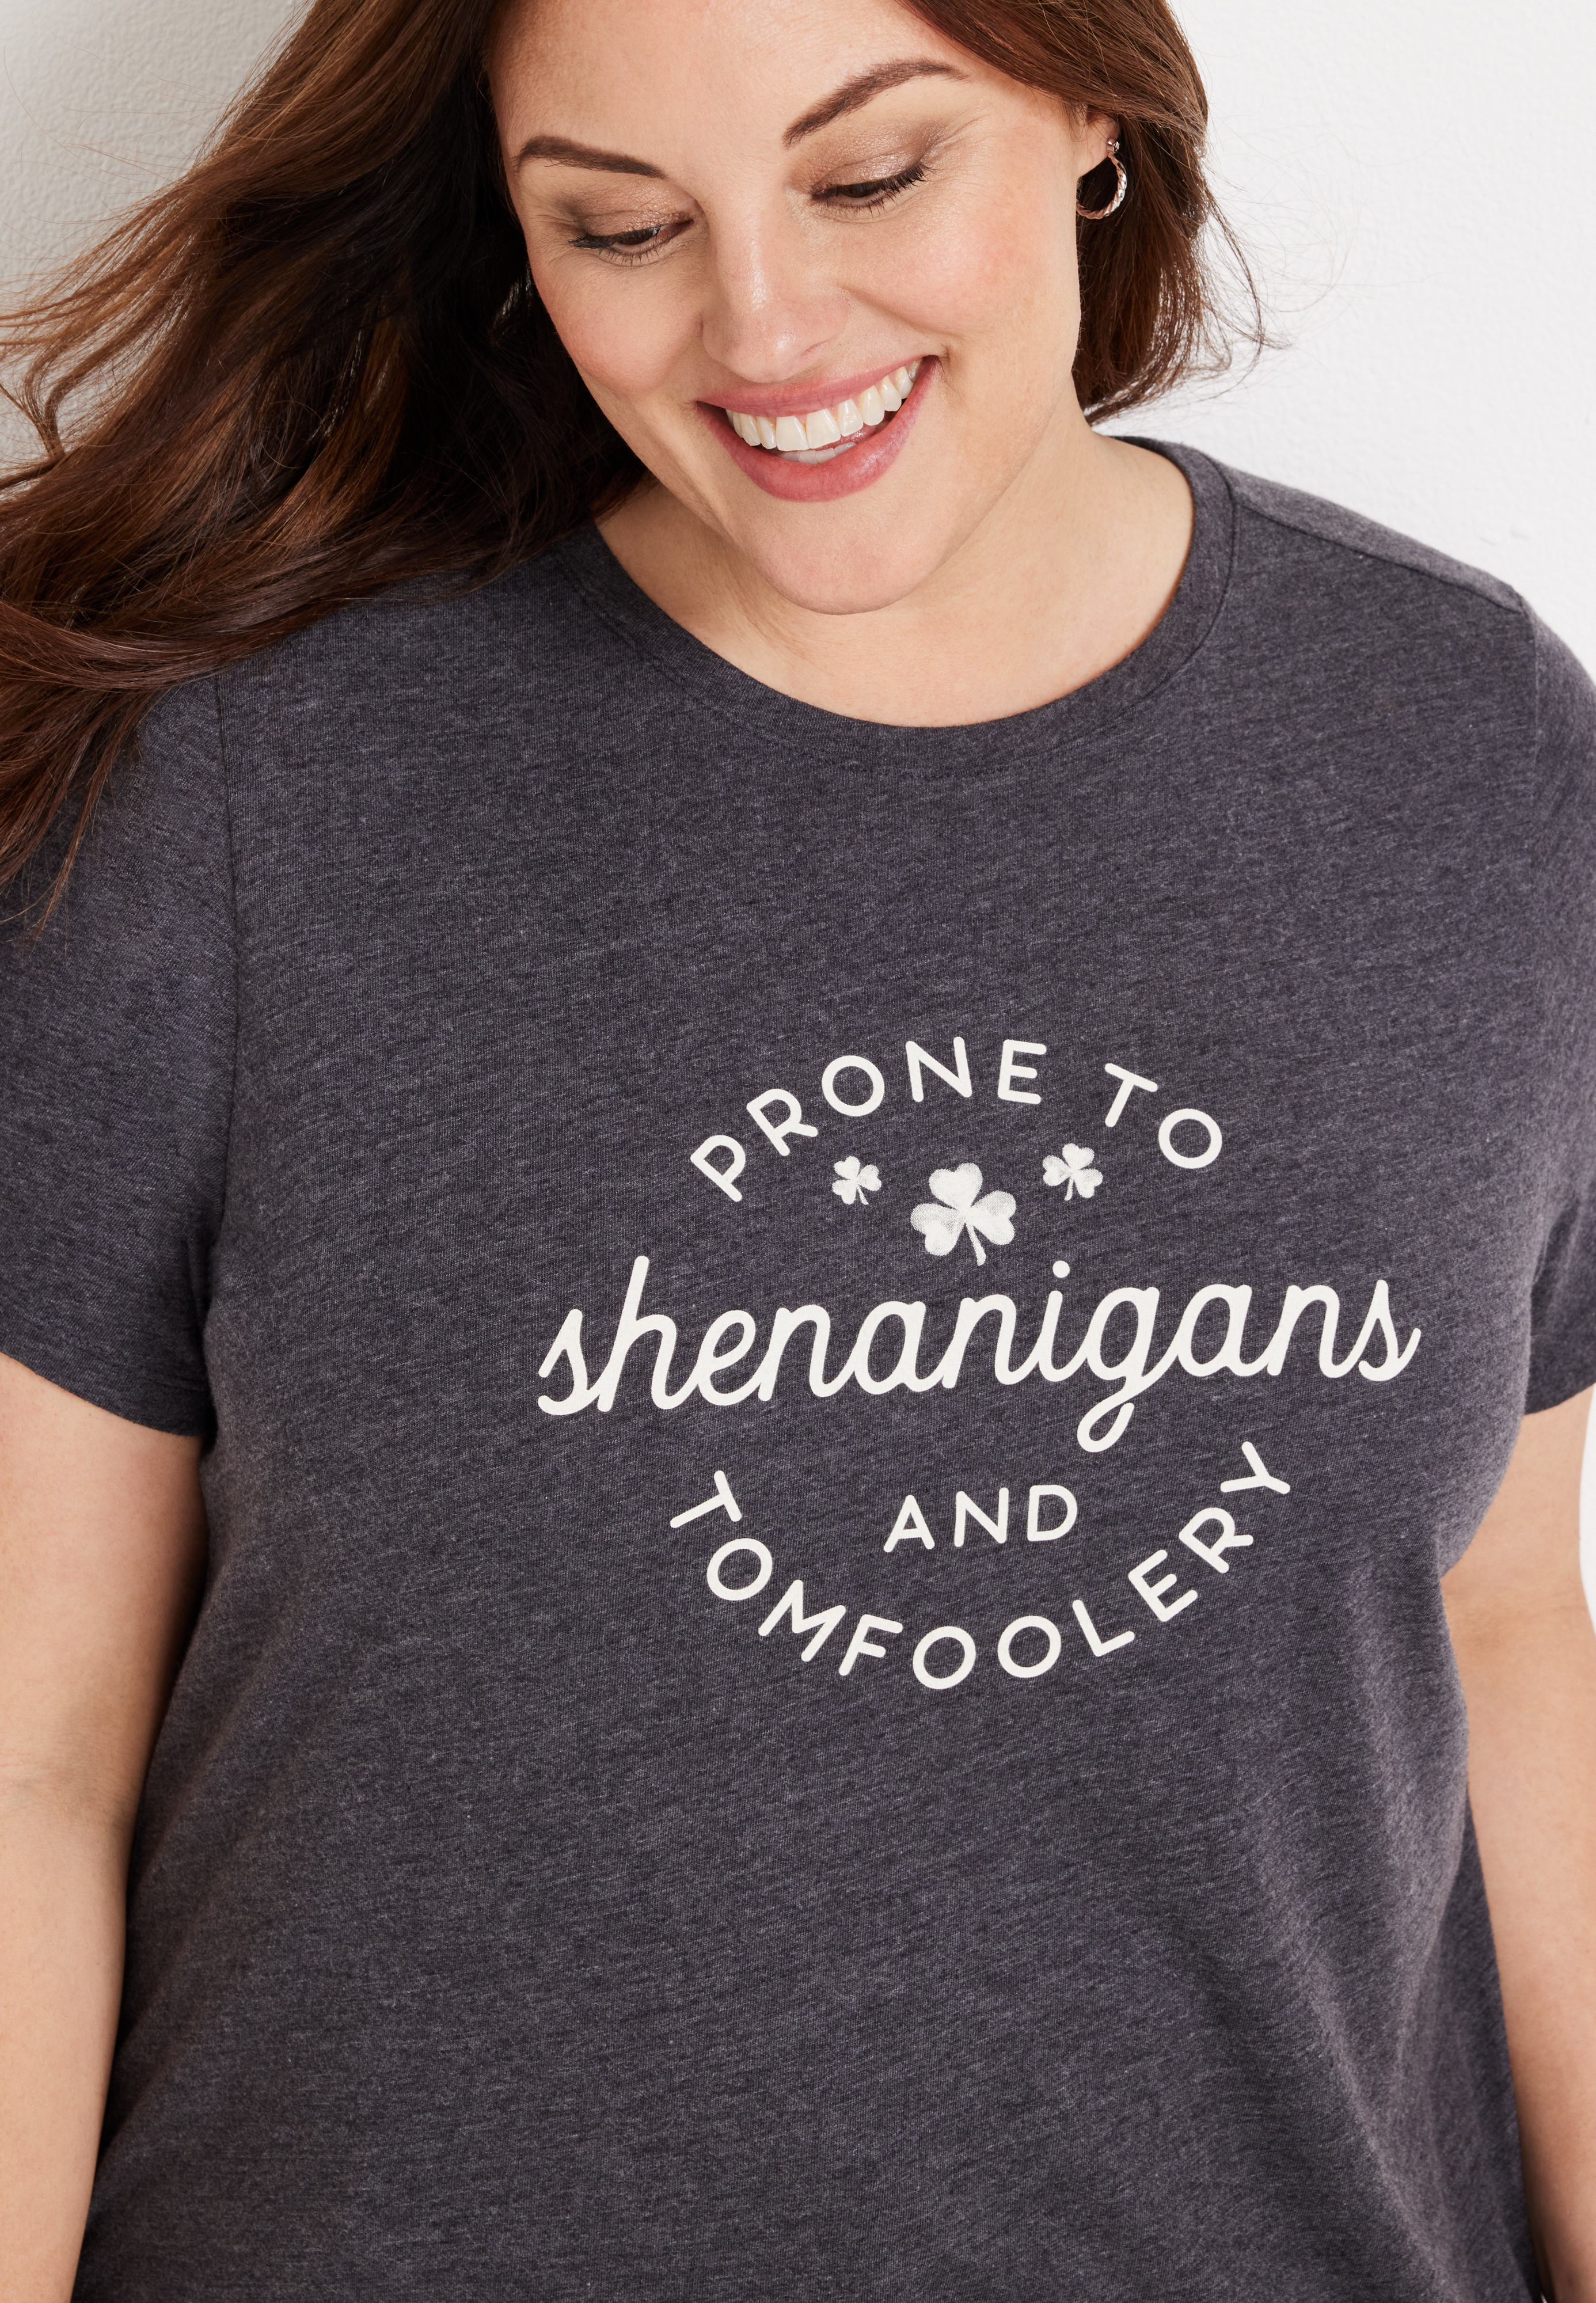 Plus Size Shenanigans Graphic Tee | maurices